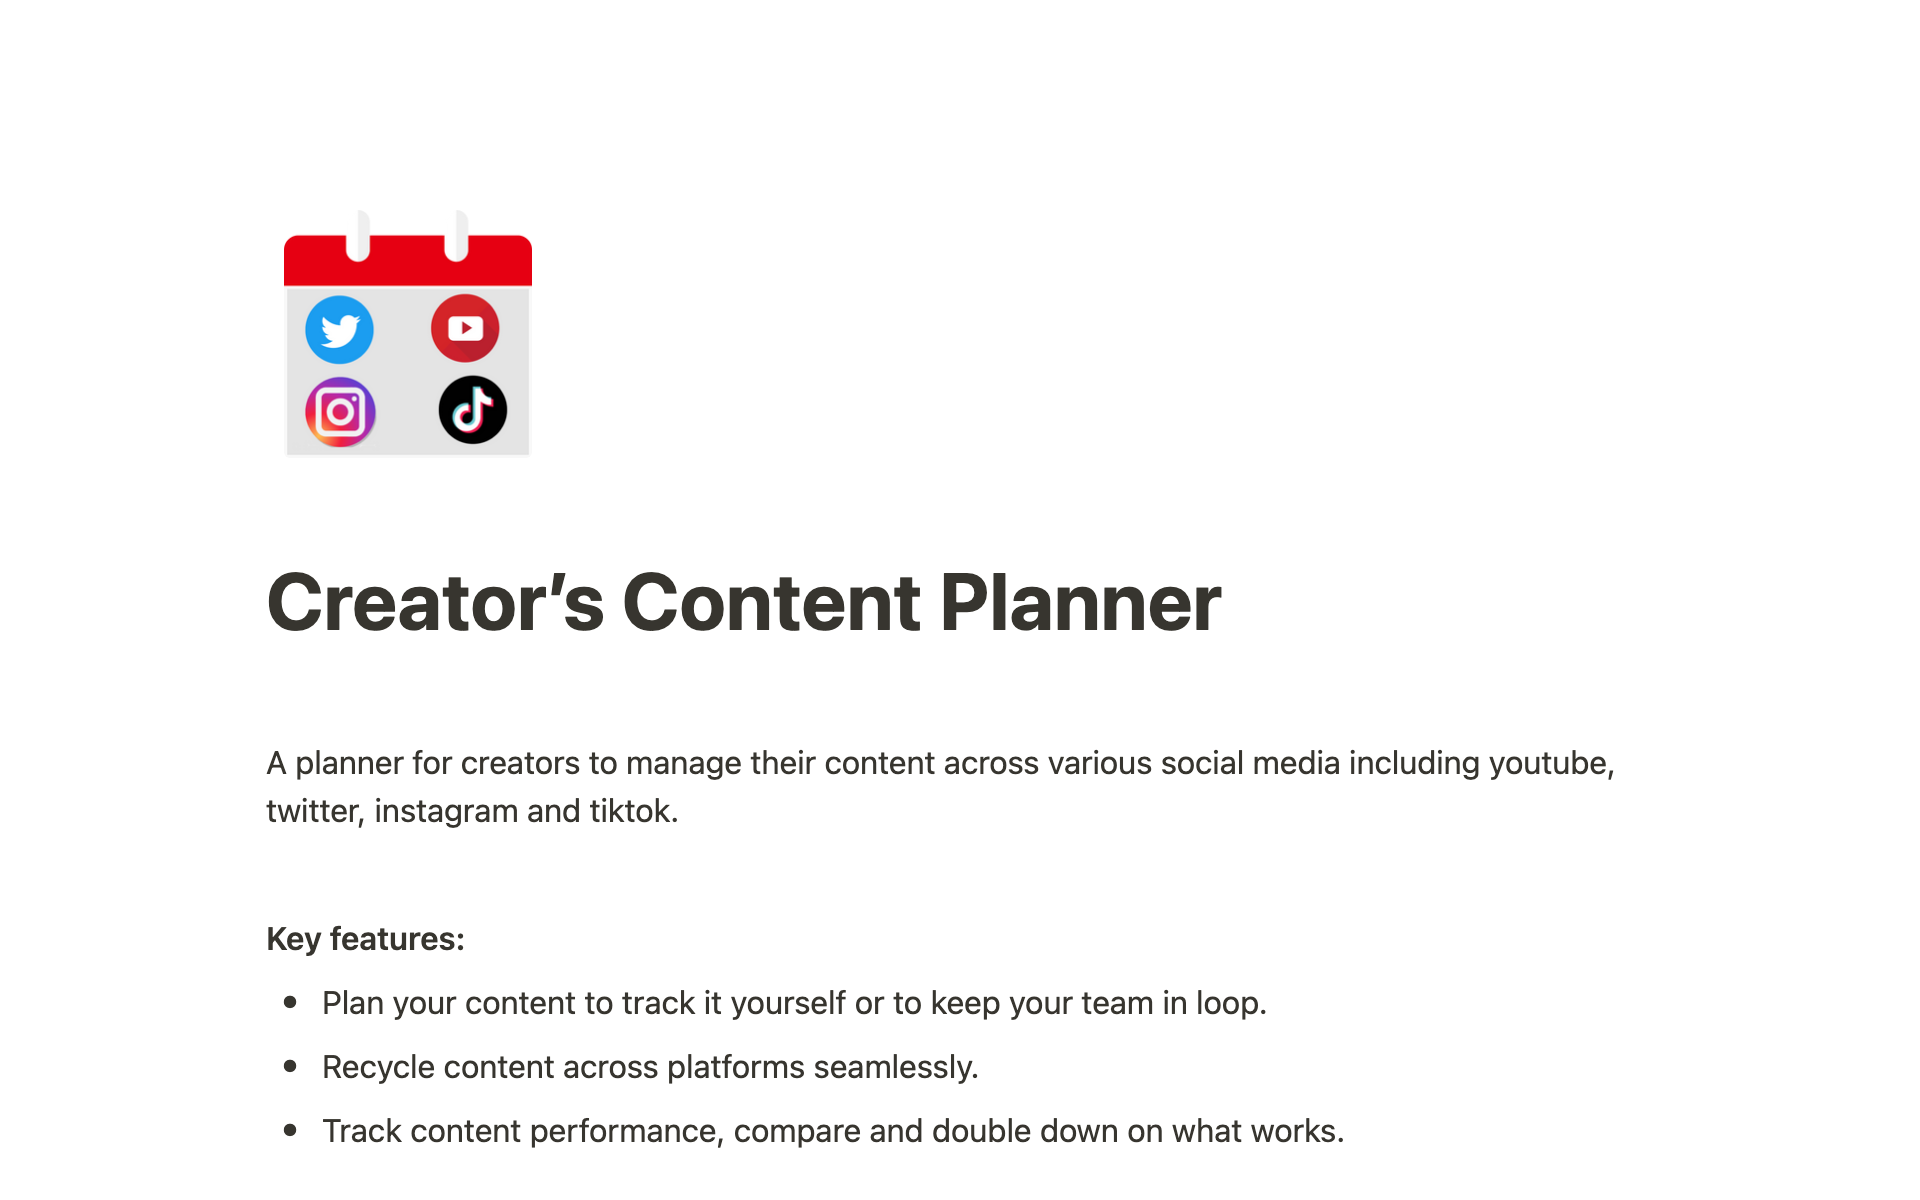 A planner for creators to manage their content across various social media including YouTube, Twitter, Instagram and TikTok.